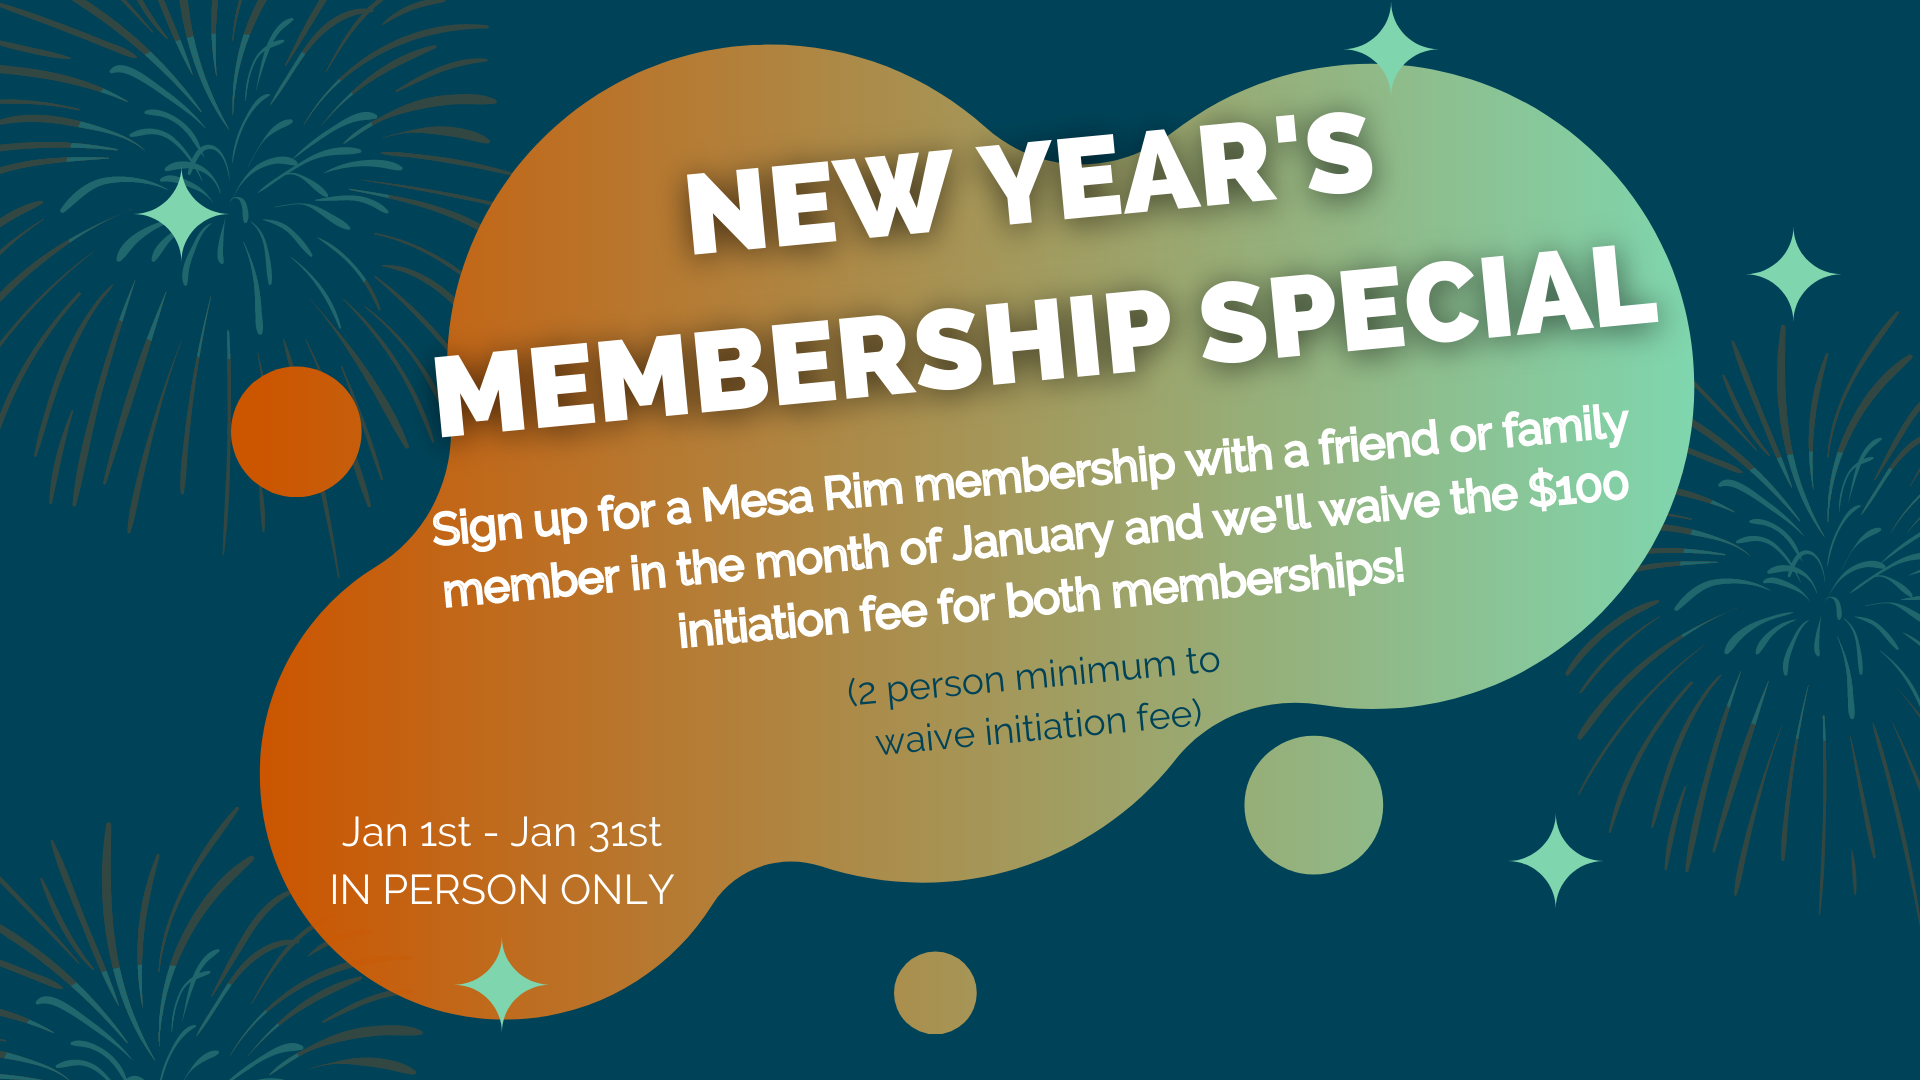 New Year's Membership Special